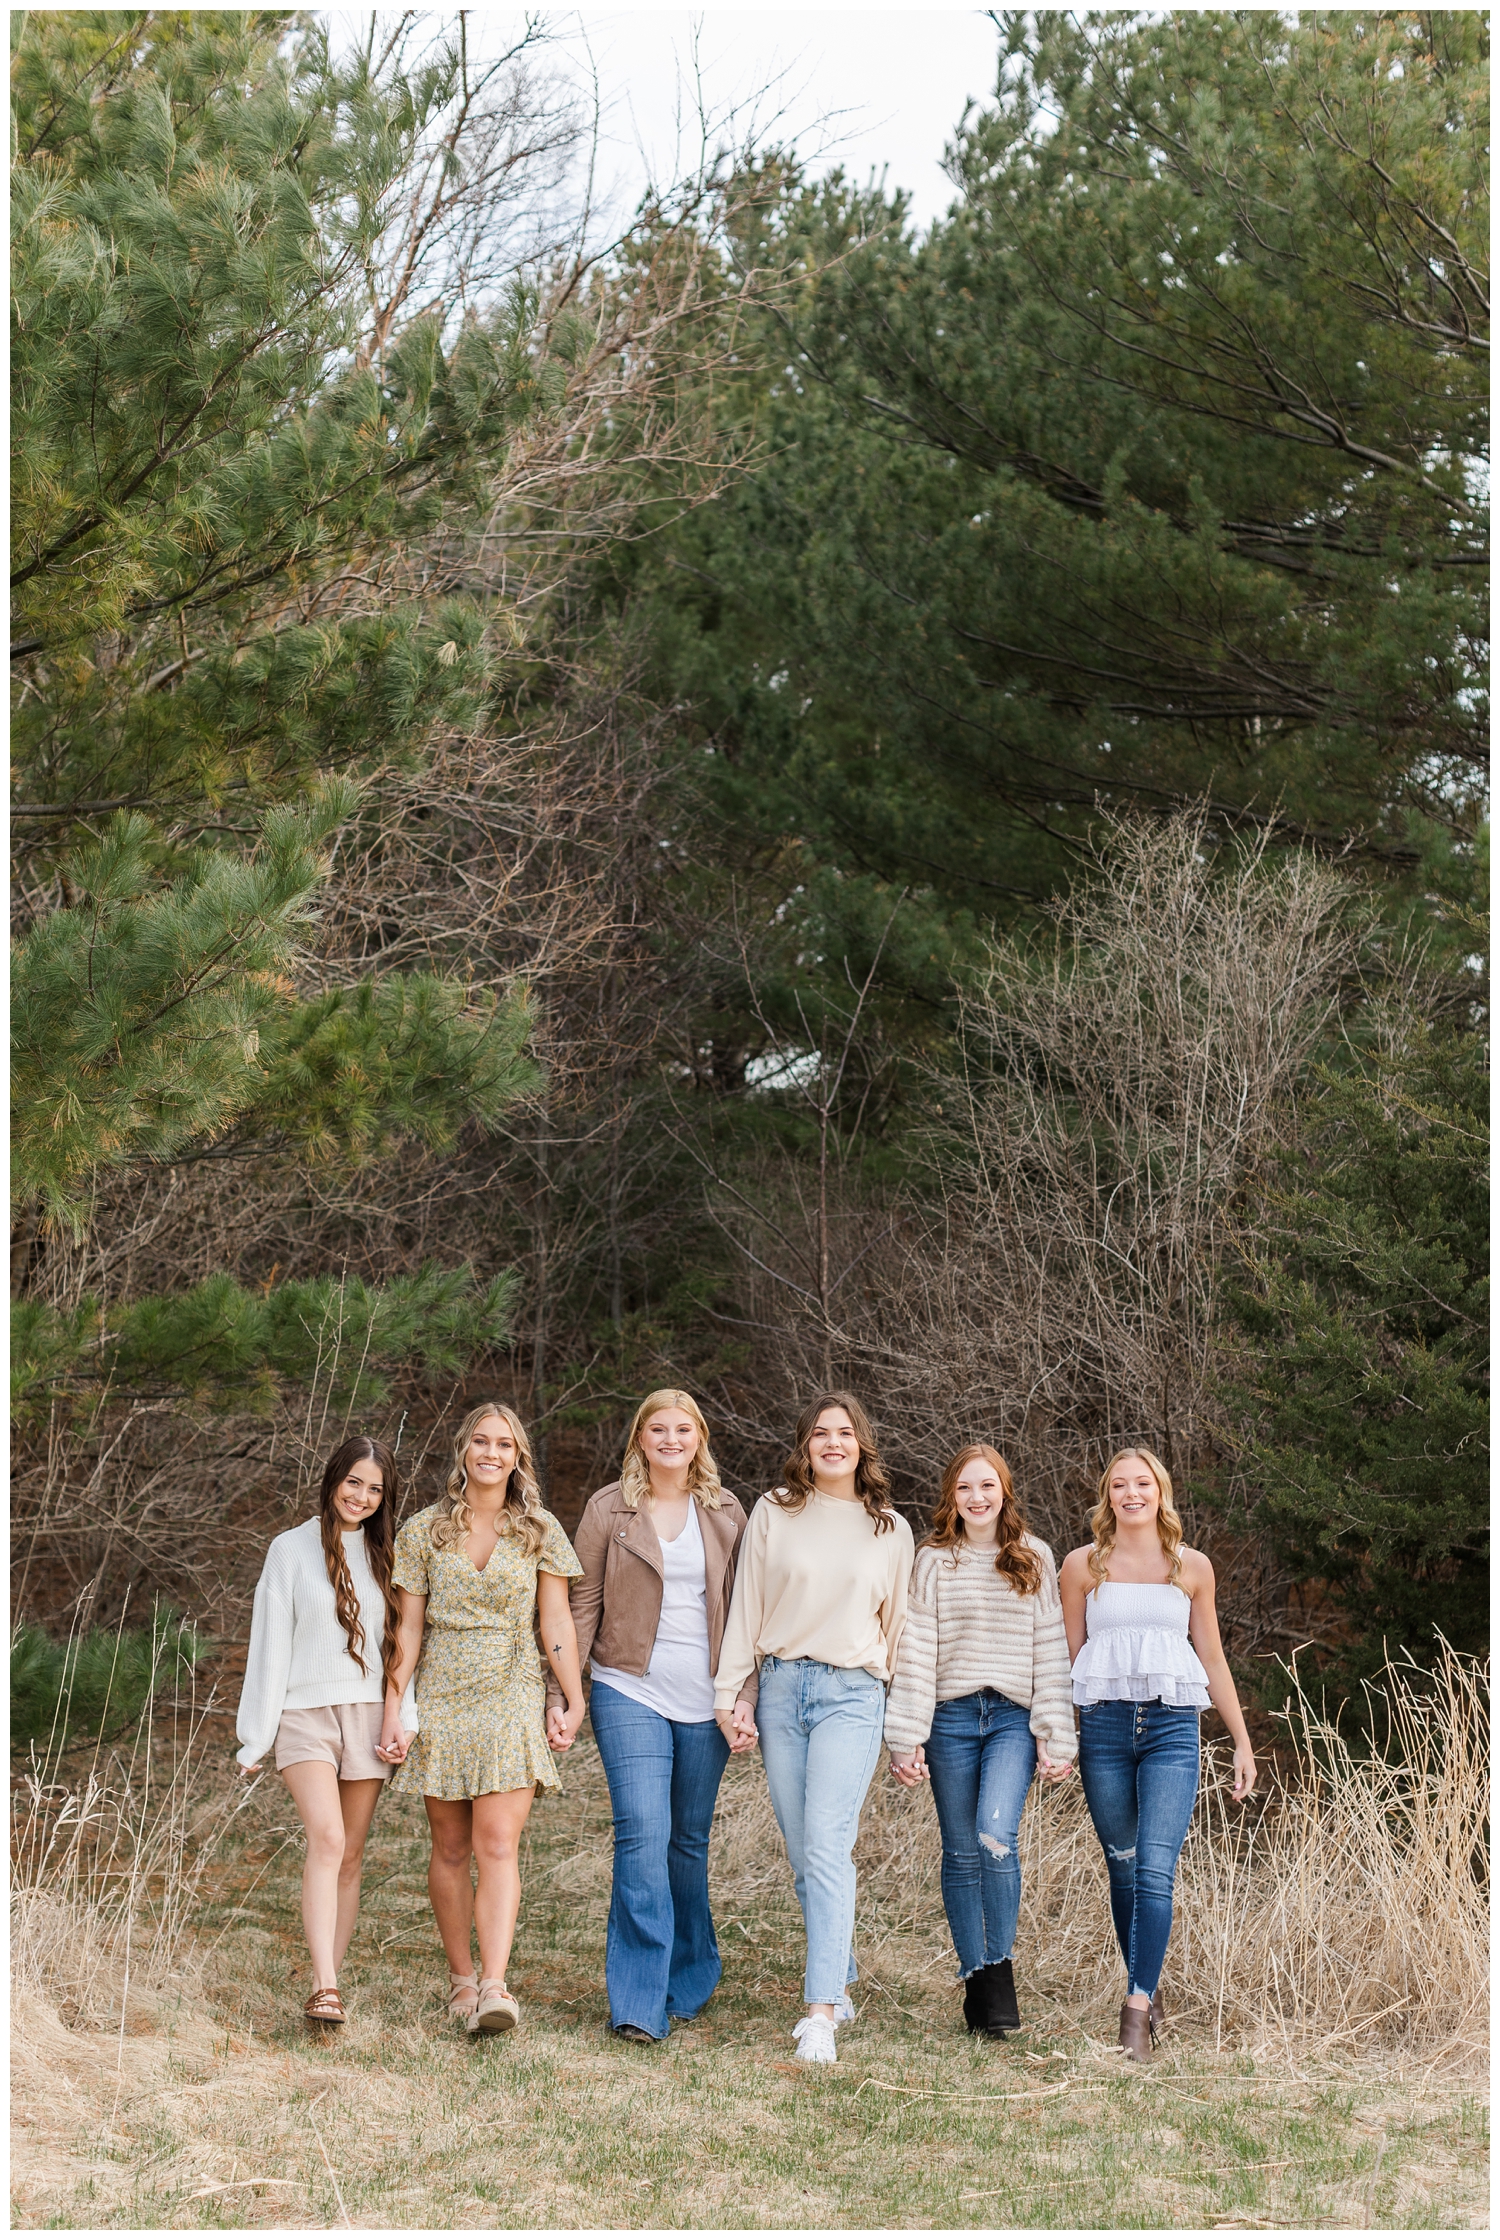 2023 senior spokesmodels hold hands while walking in a grassy field | CB Studio